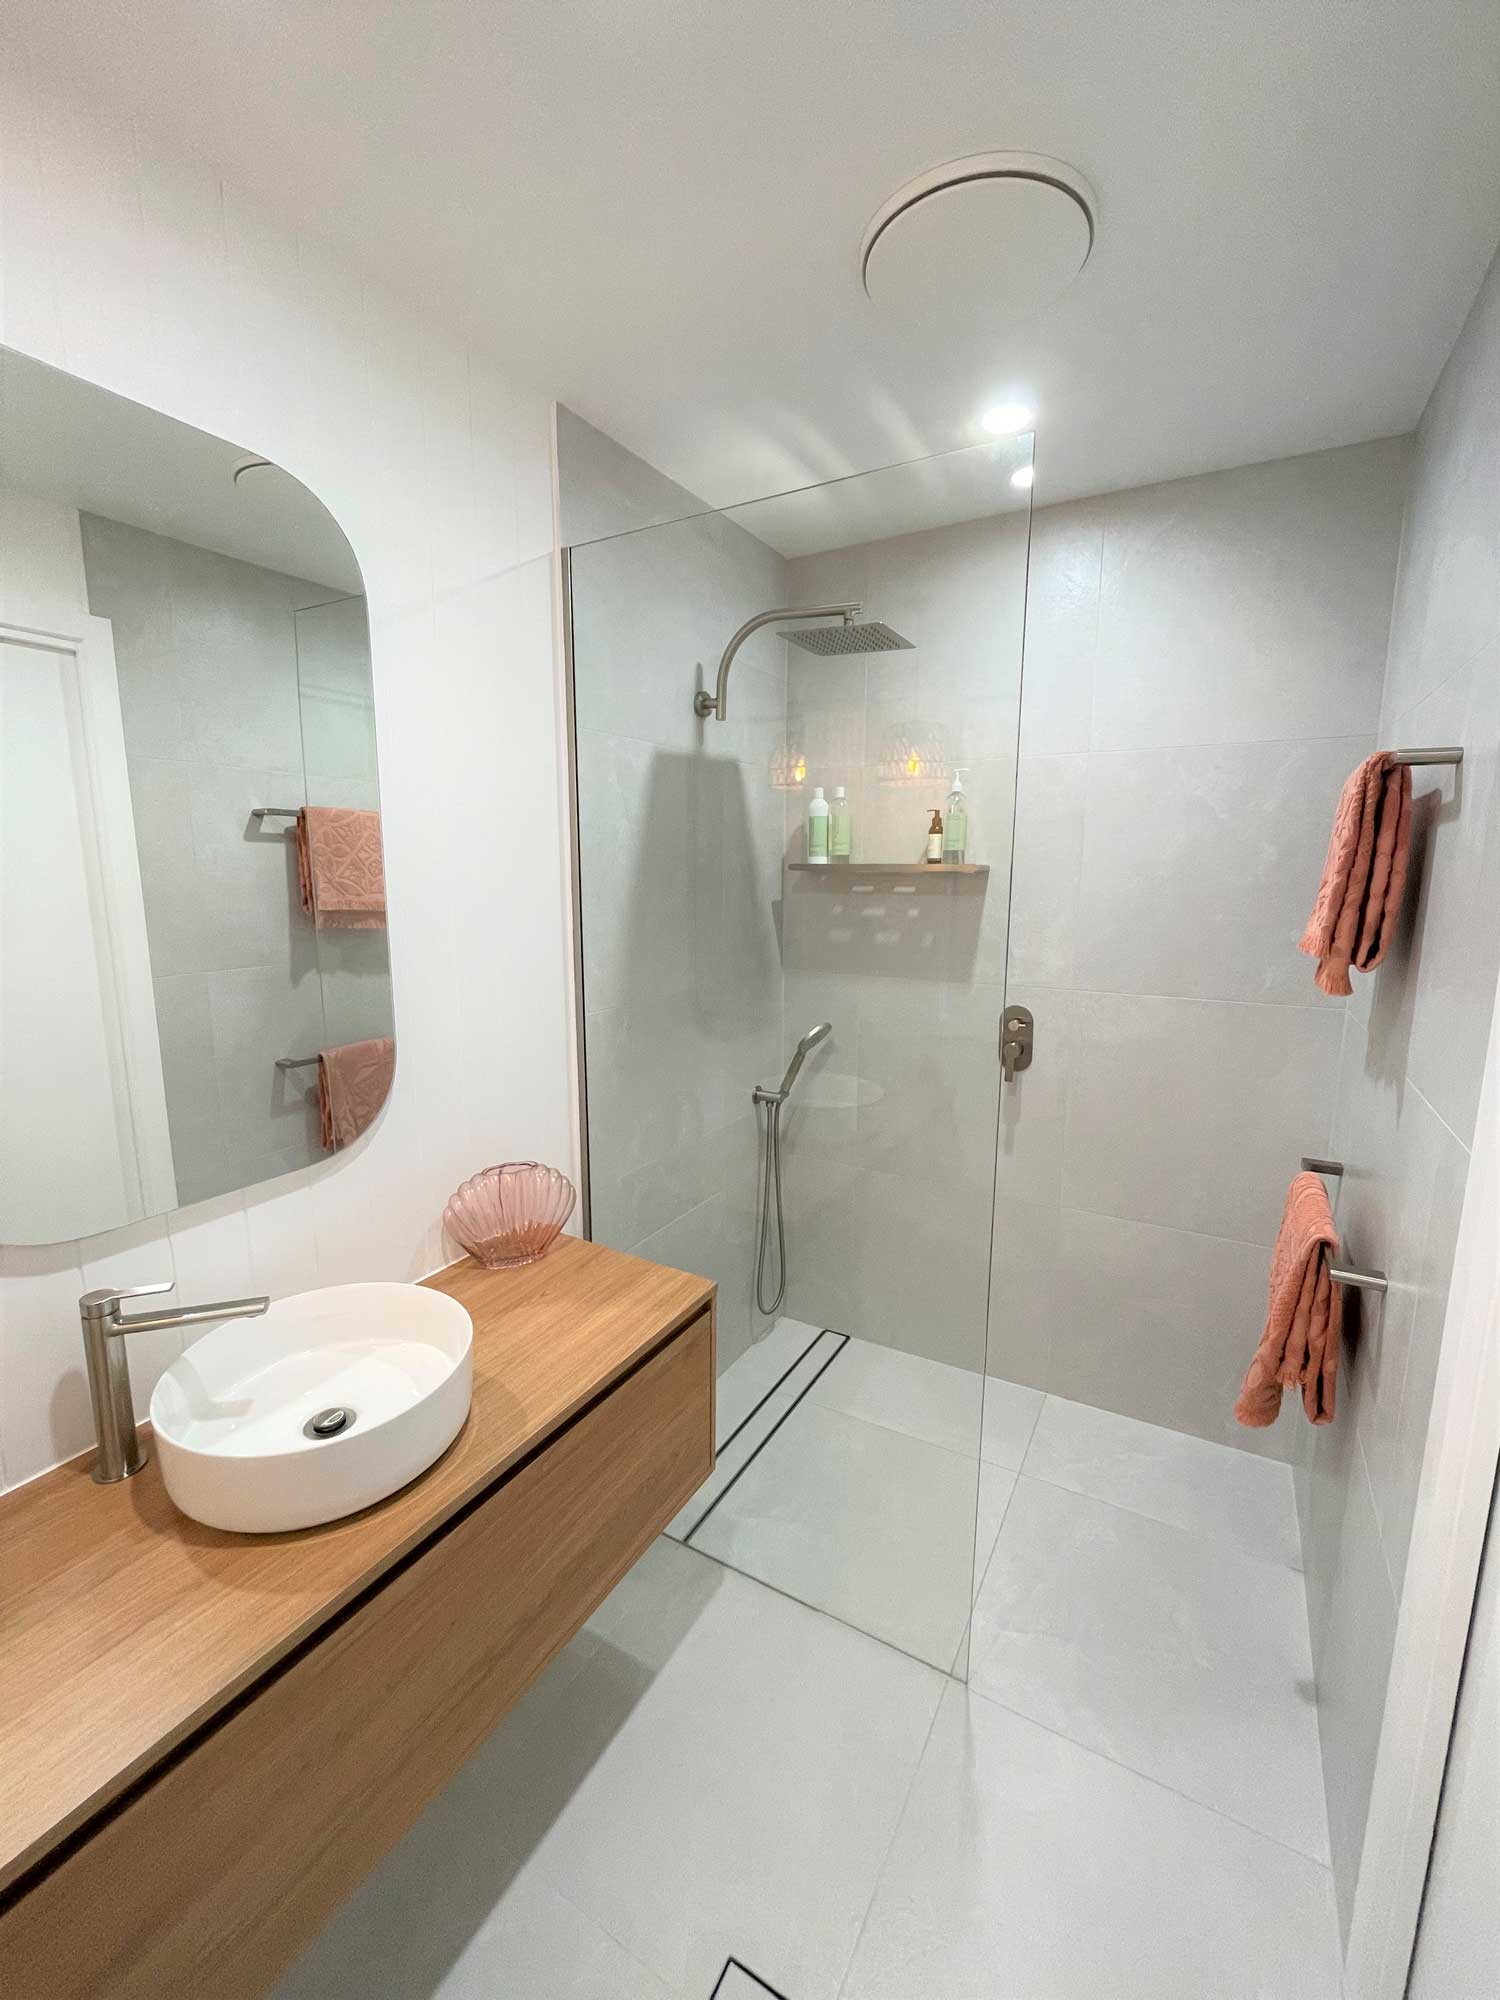 New Bathroom — Home Builders in Burleigh, QLD